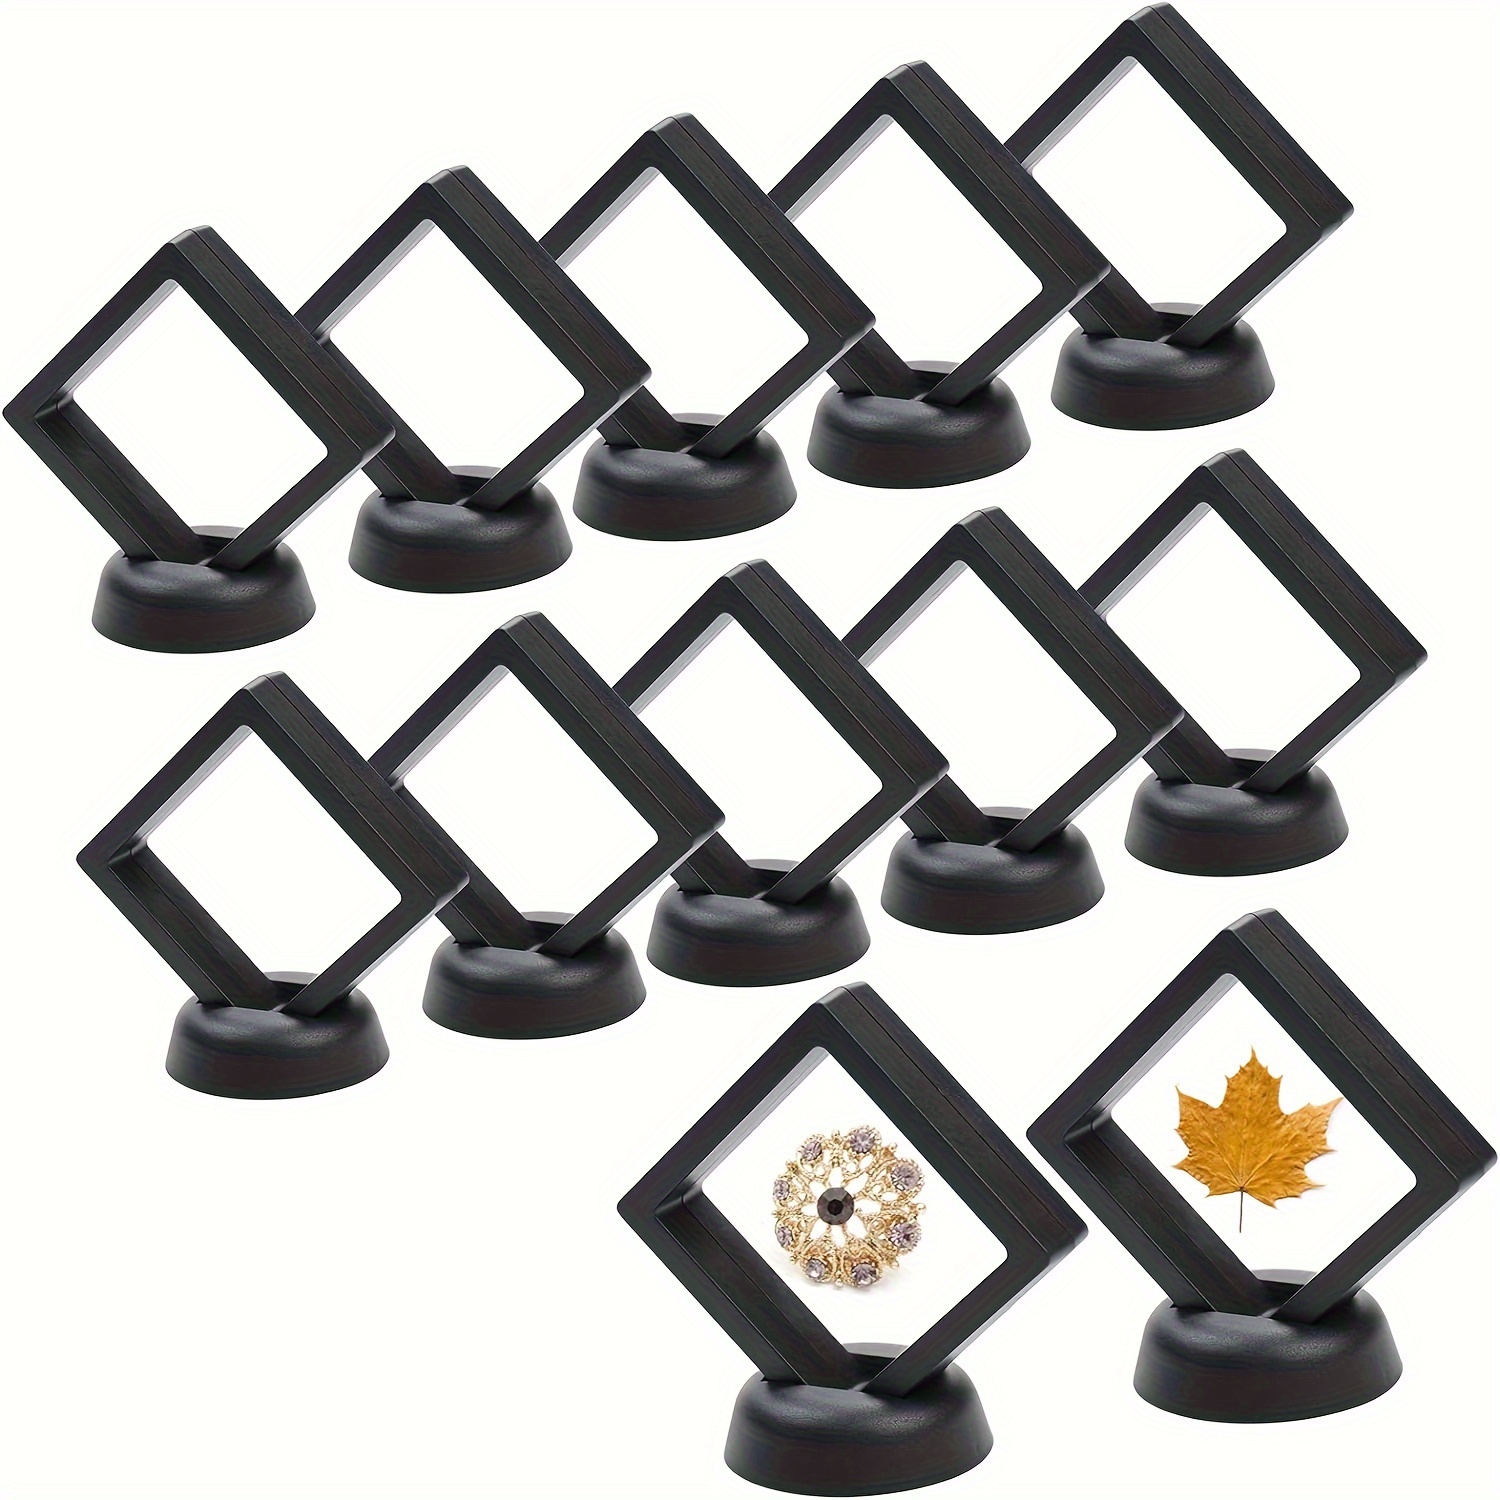 

5pcs 3d Floating Frame With Base Holder, Coin Display Frame Storage Box, Small Shadow Box, Suitable For Earrings, Rings, Brooches, Military Medals